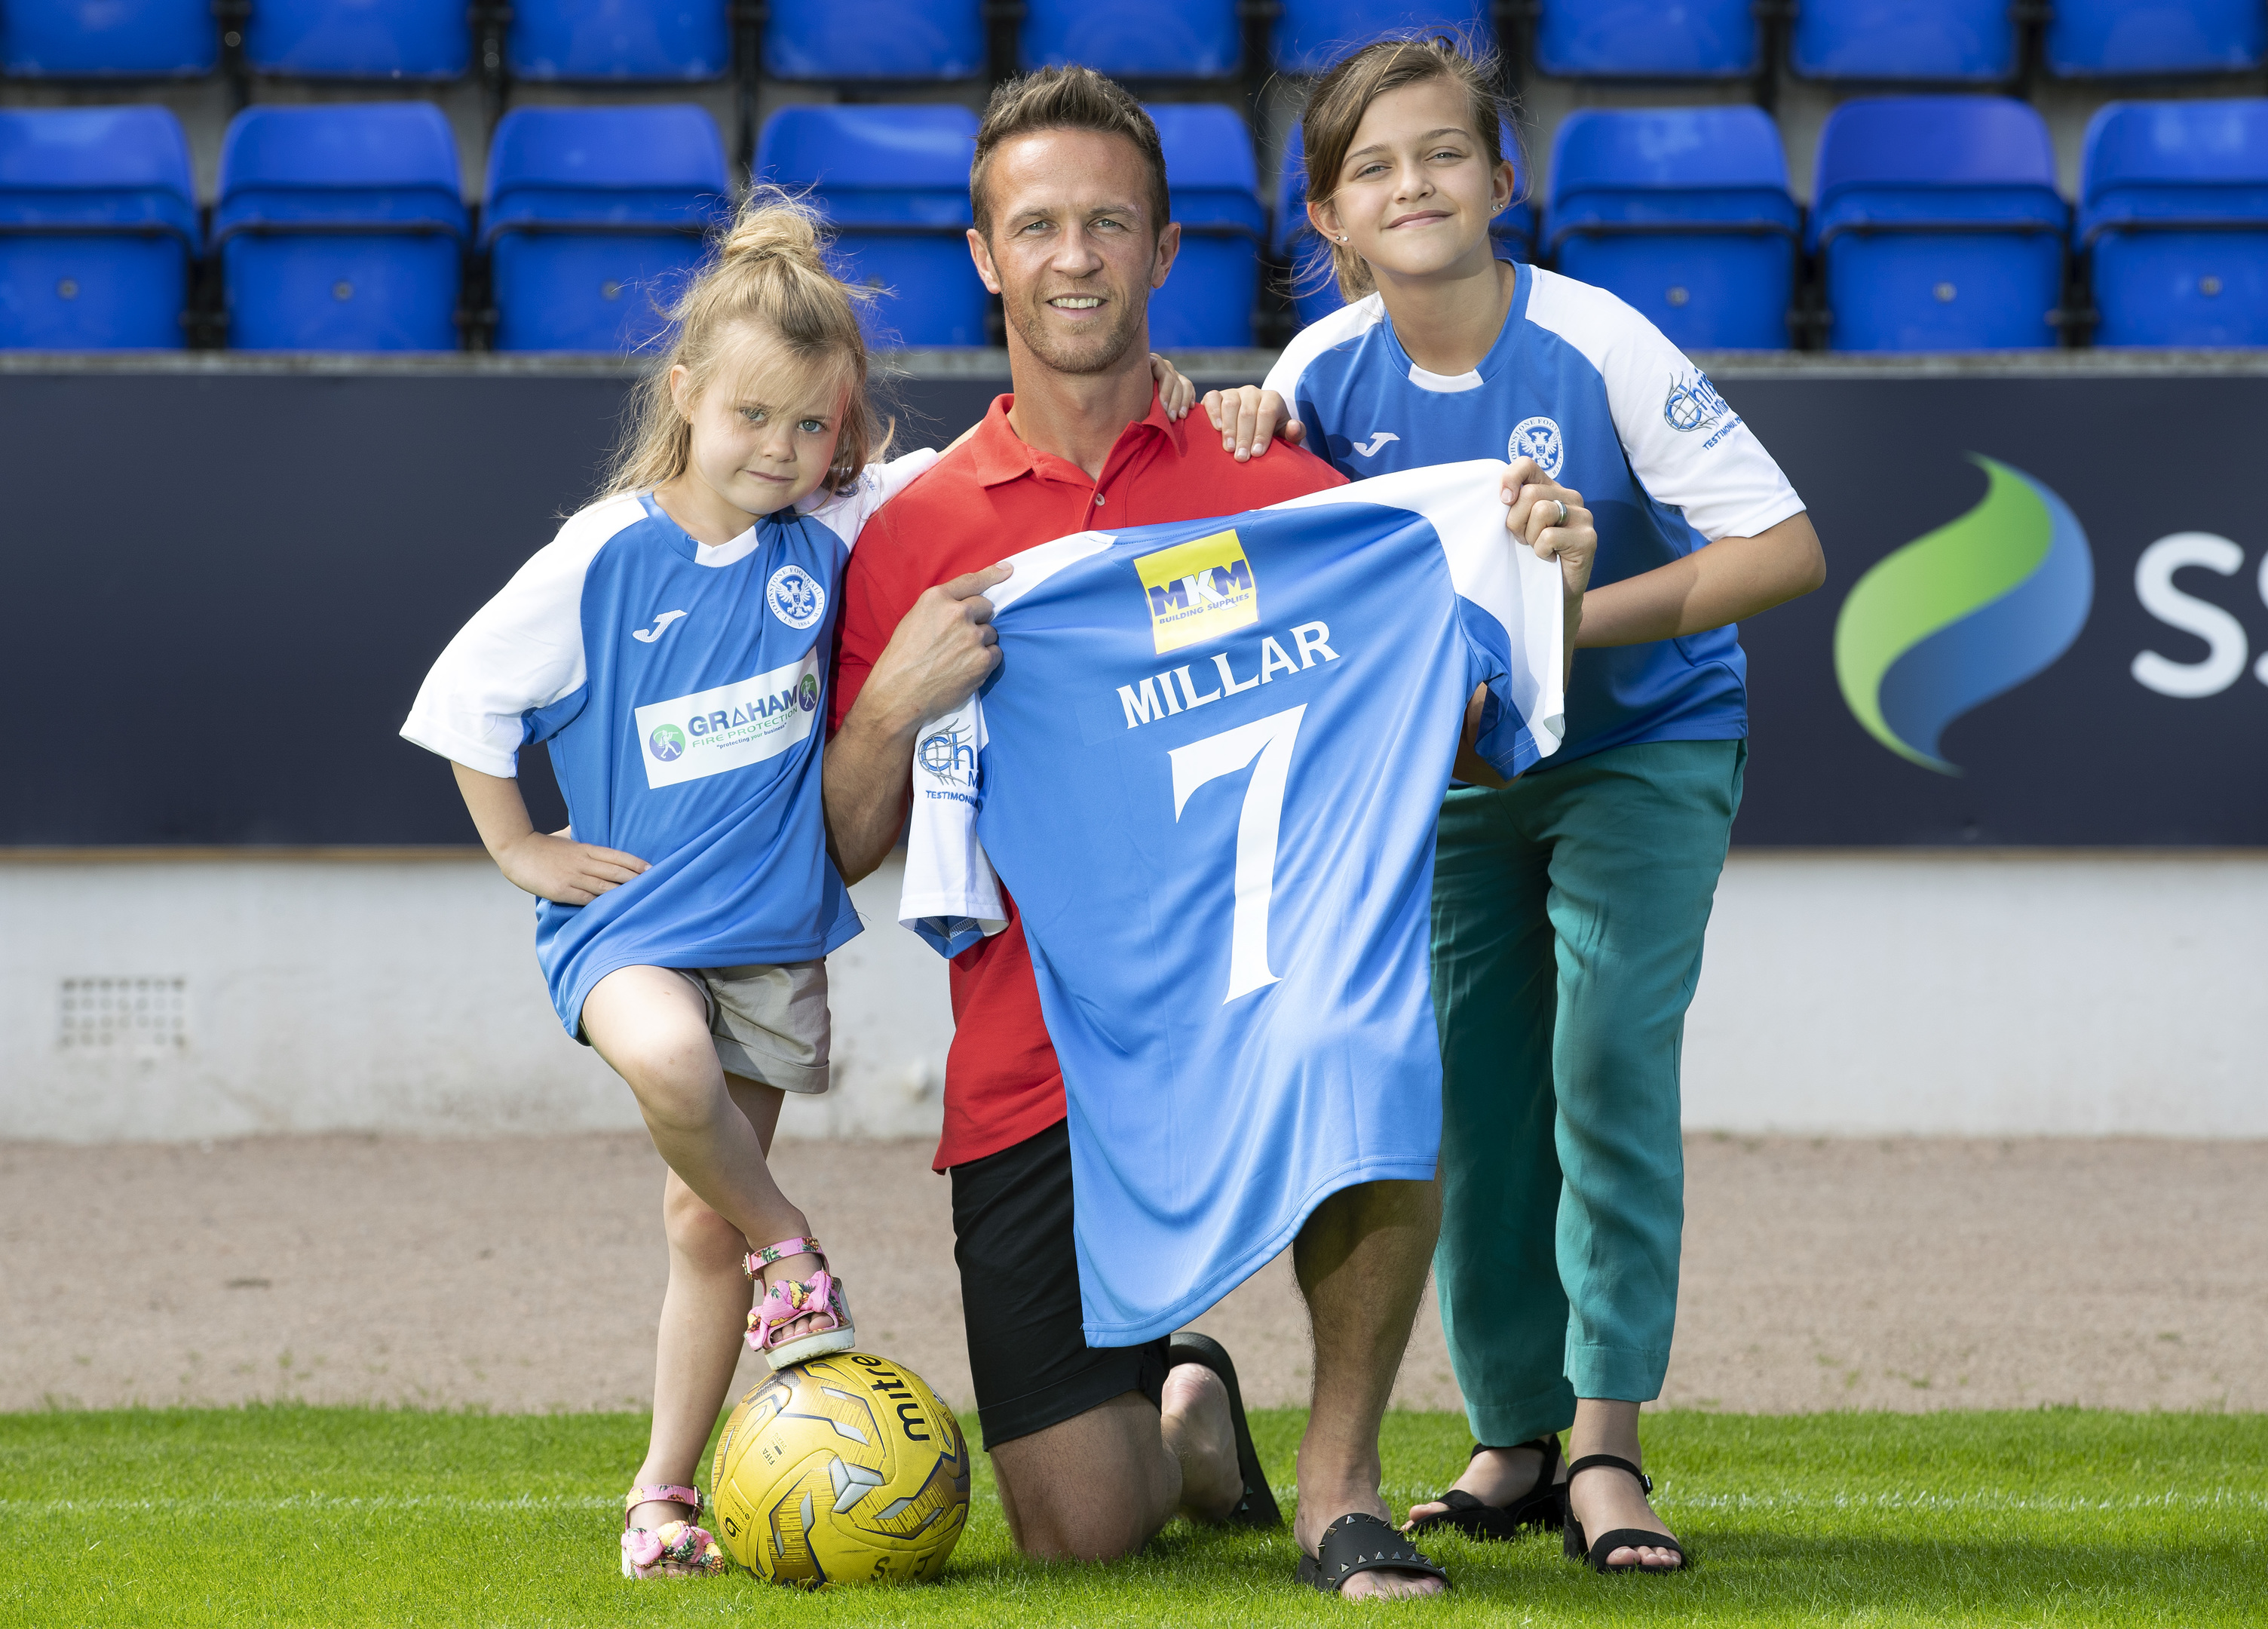 Former St Johnstone player Chris Millar pictured ahead of his testimonial game against Aberdeen this weekend with his daughters Sophia (6) and Ellie (11) showing off the testimonial kit.